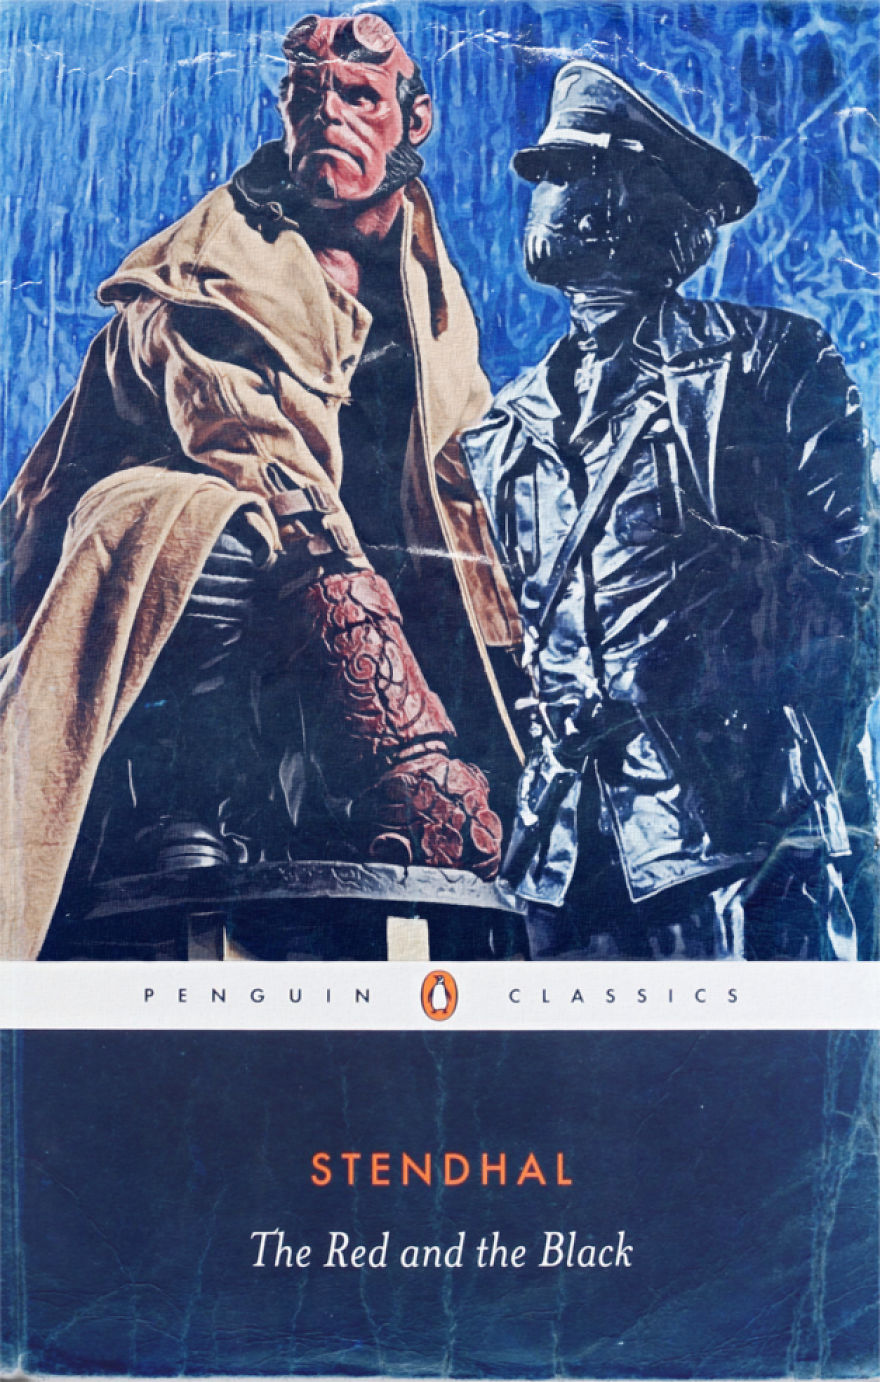 TV And Movie Icons Invade These Classic Novel Covers